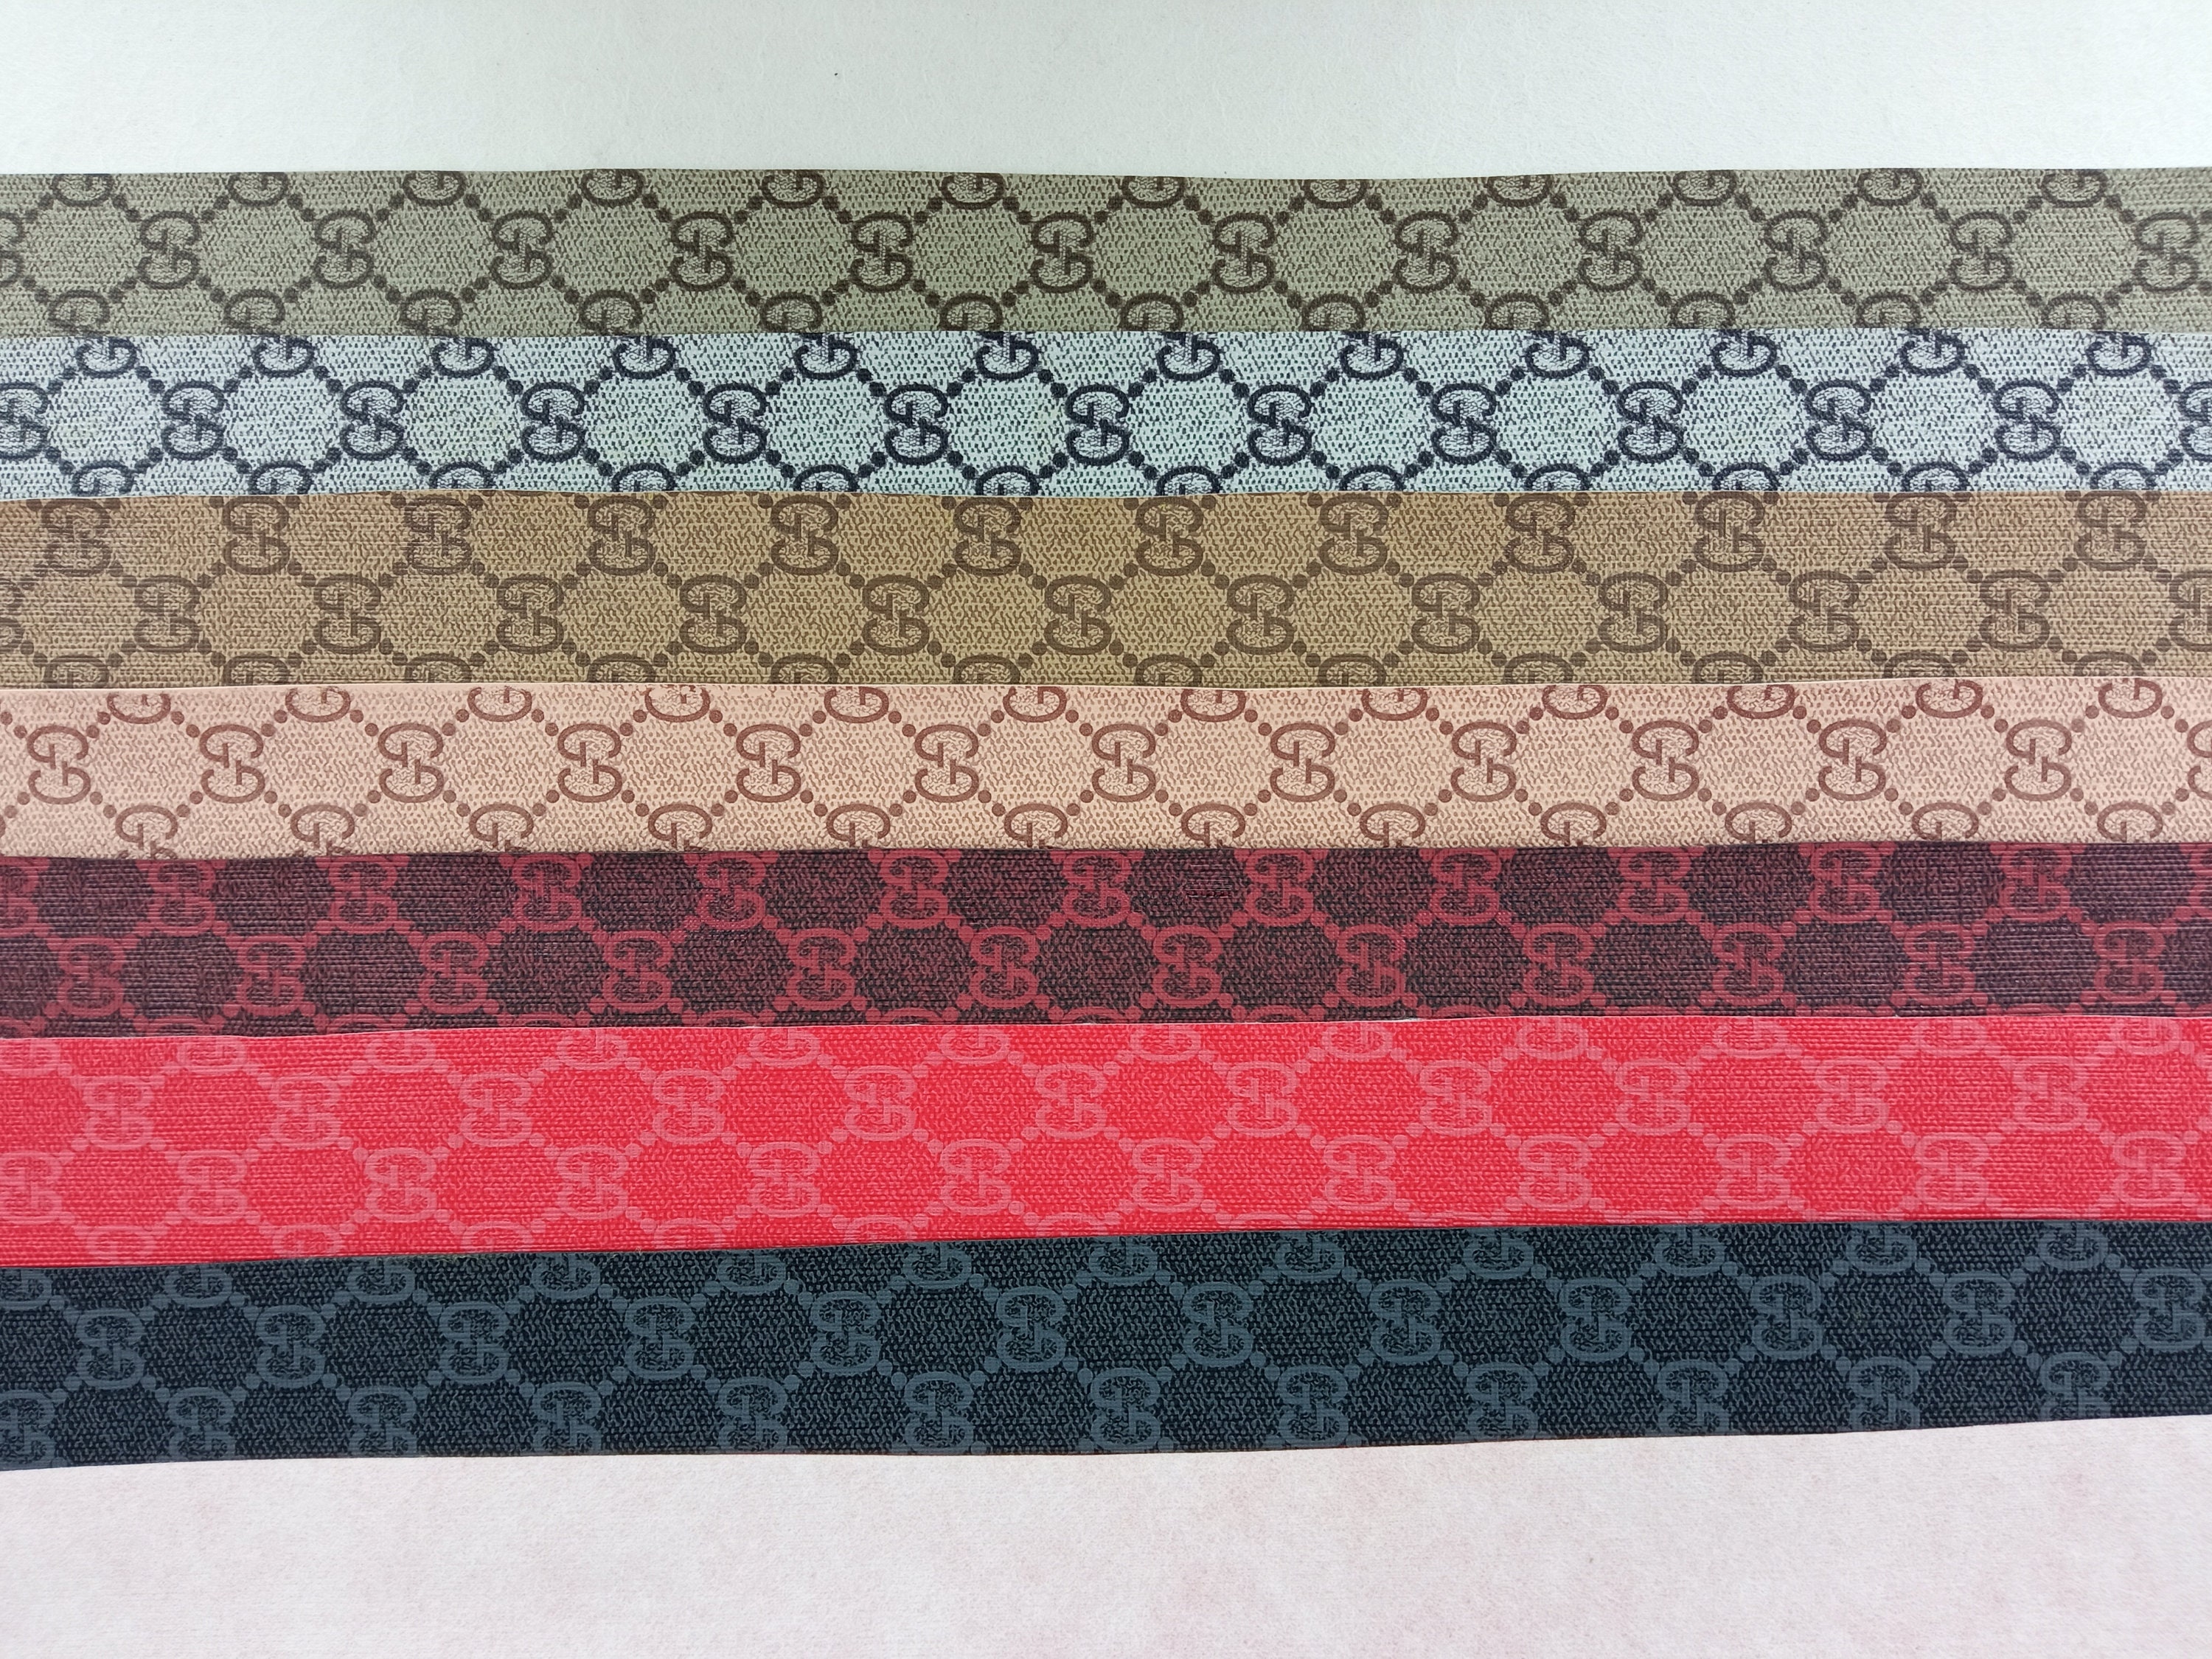 Black LV leather fabric with mini gold shiny patterns